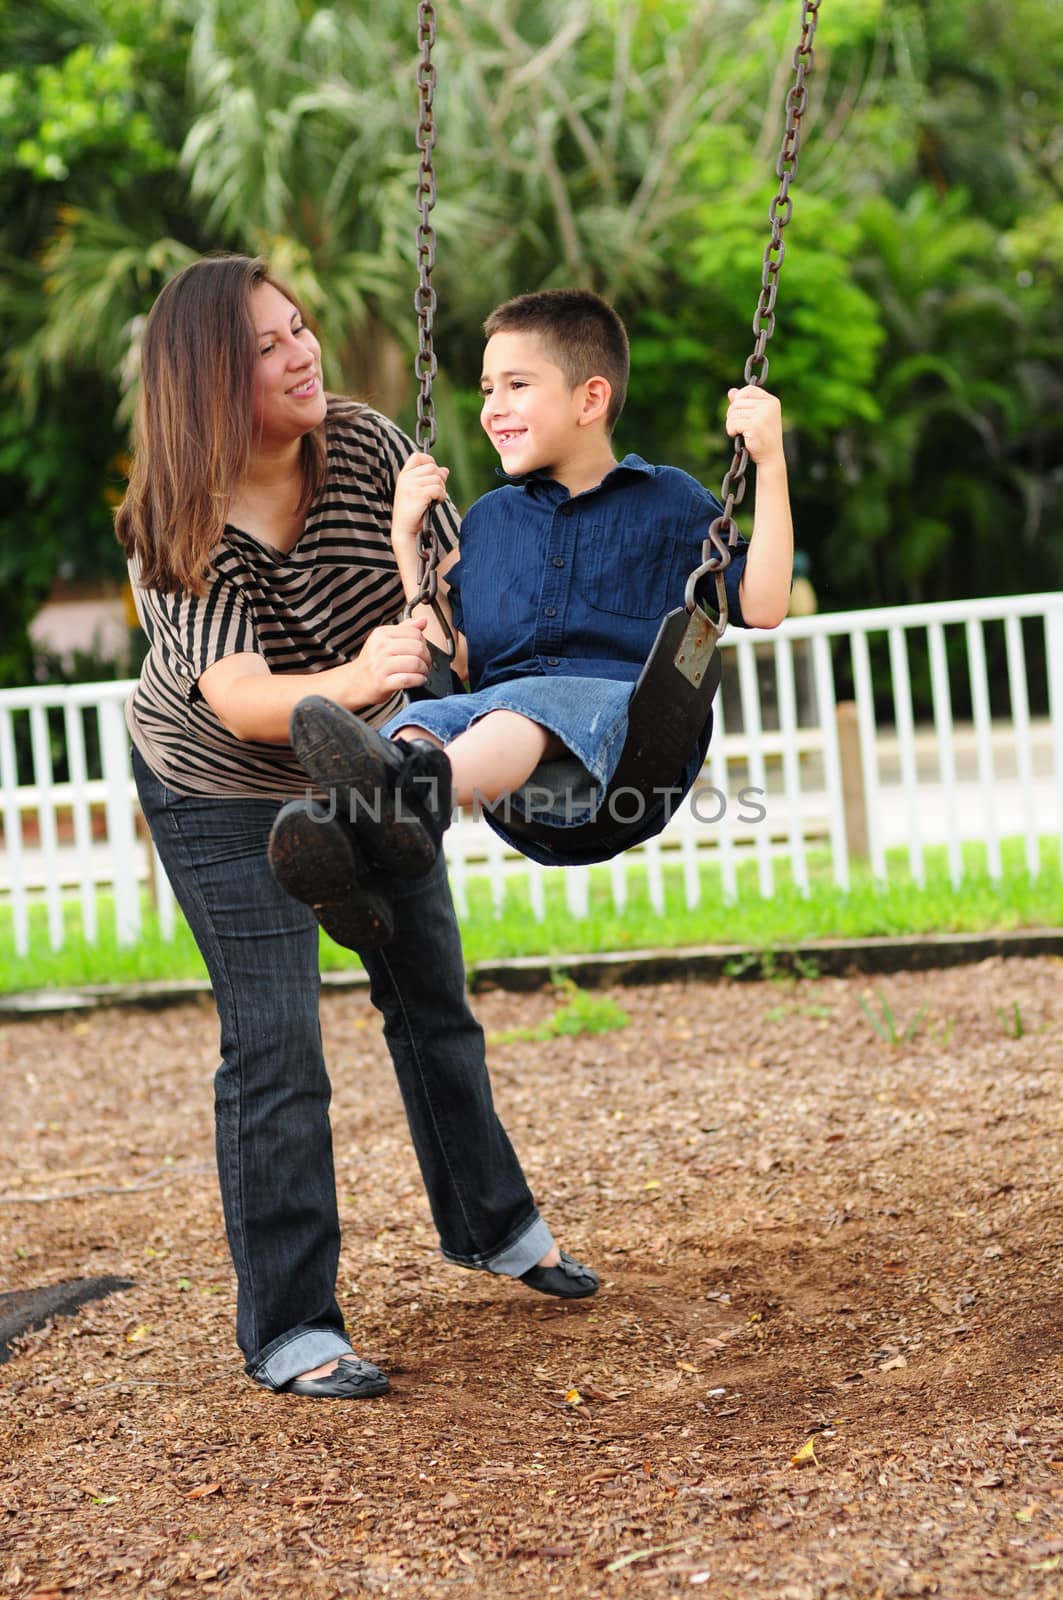 mother and child playing at park on swing